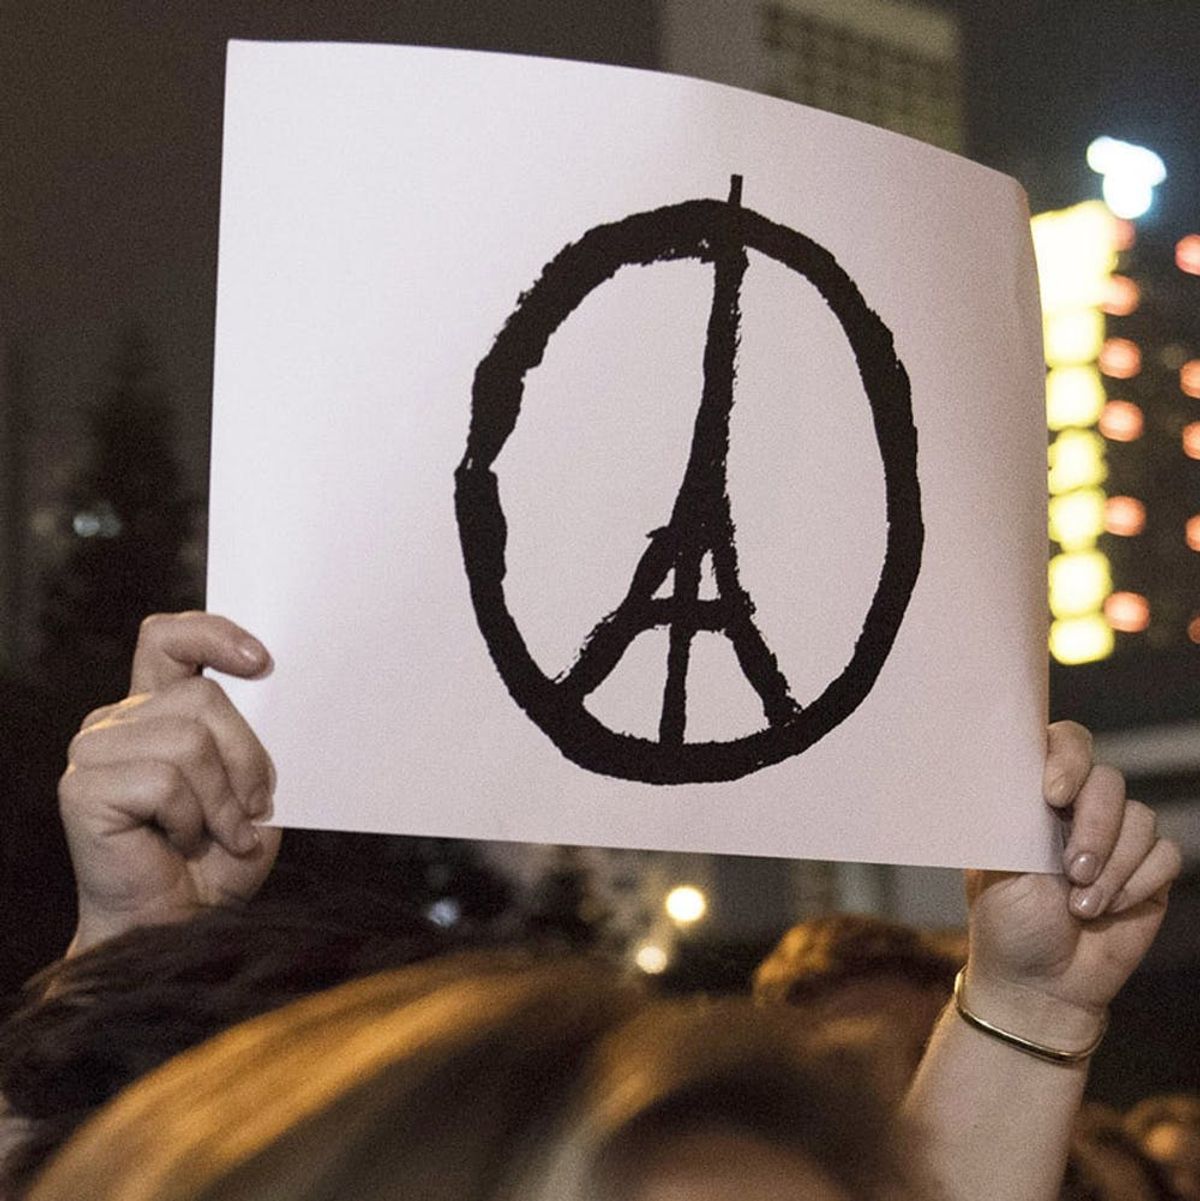 Meet the Artist Behind the Peace for Paris Symbol